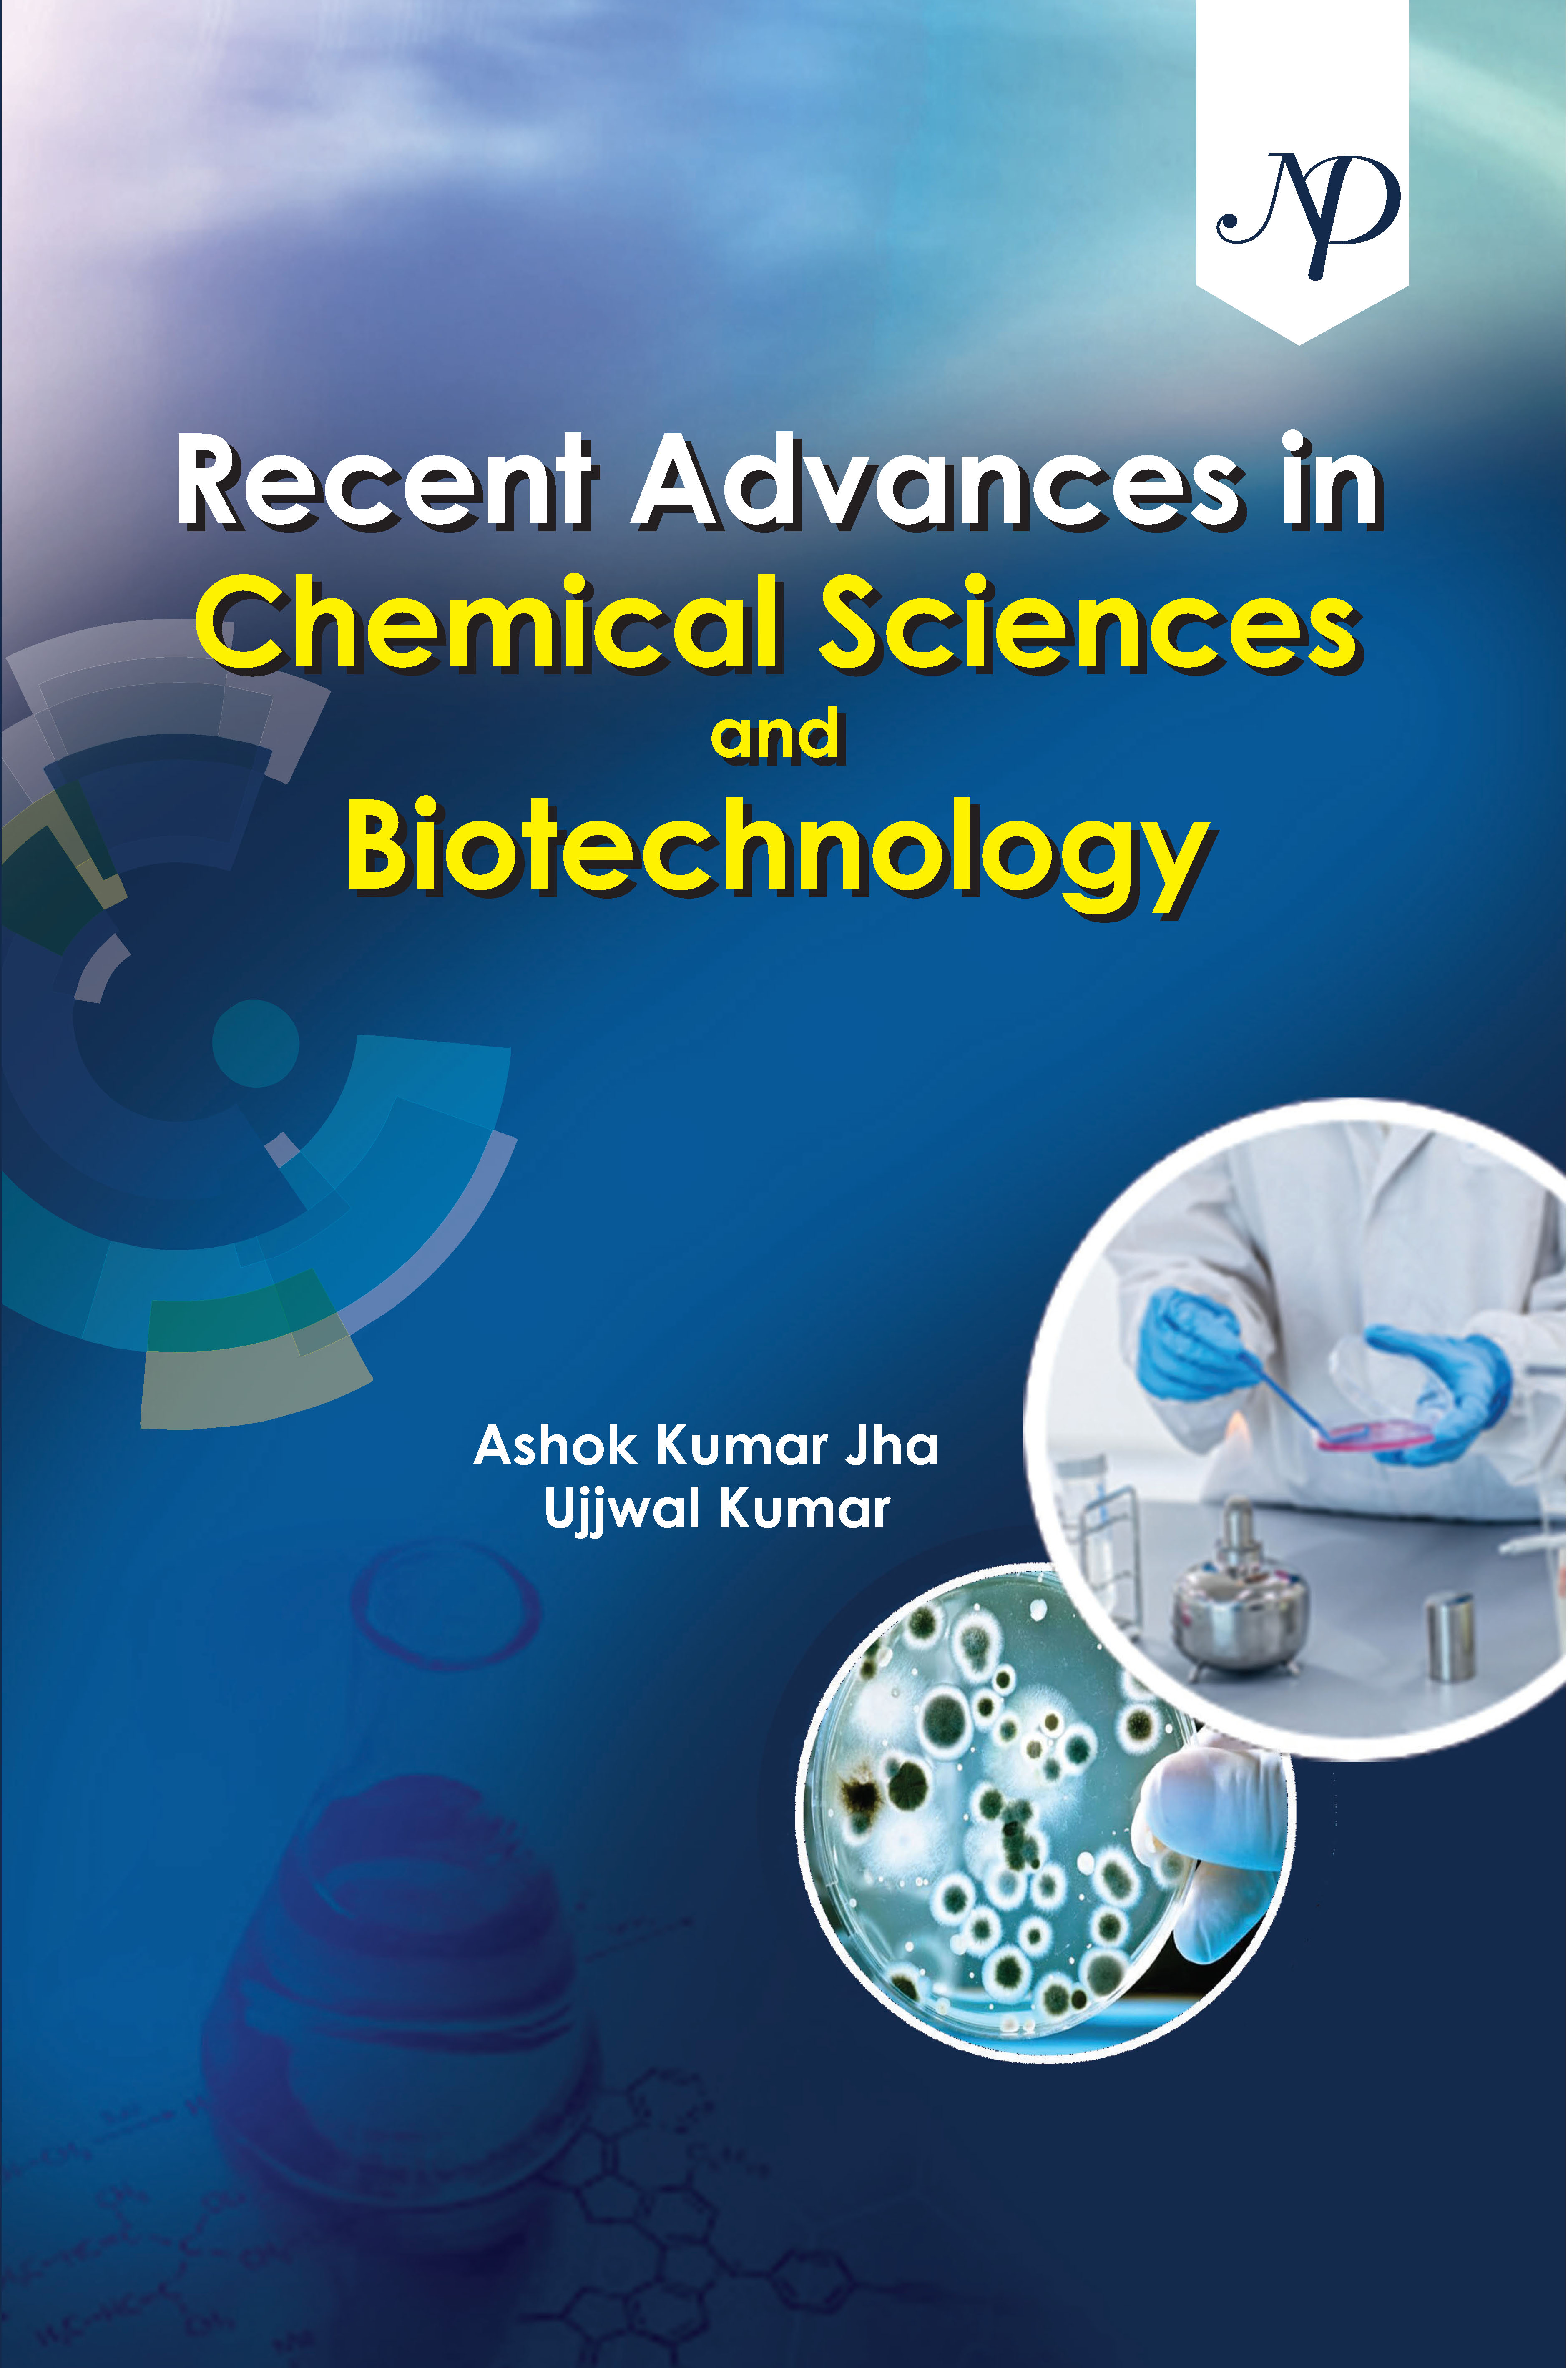 Recent advances in chemical Sciences and biotechonology cover.jpg